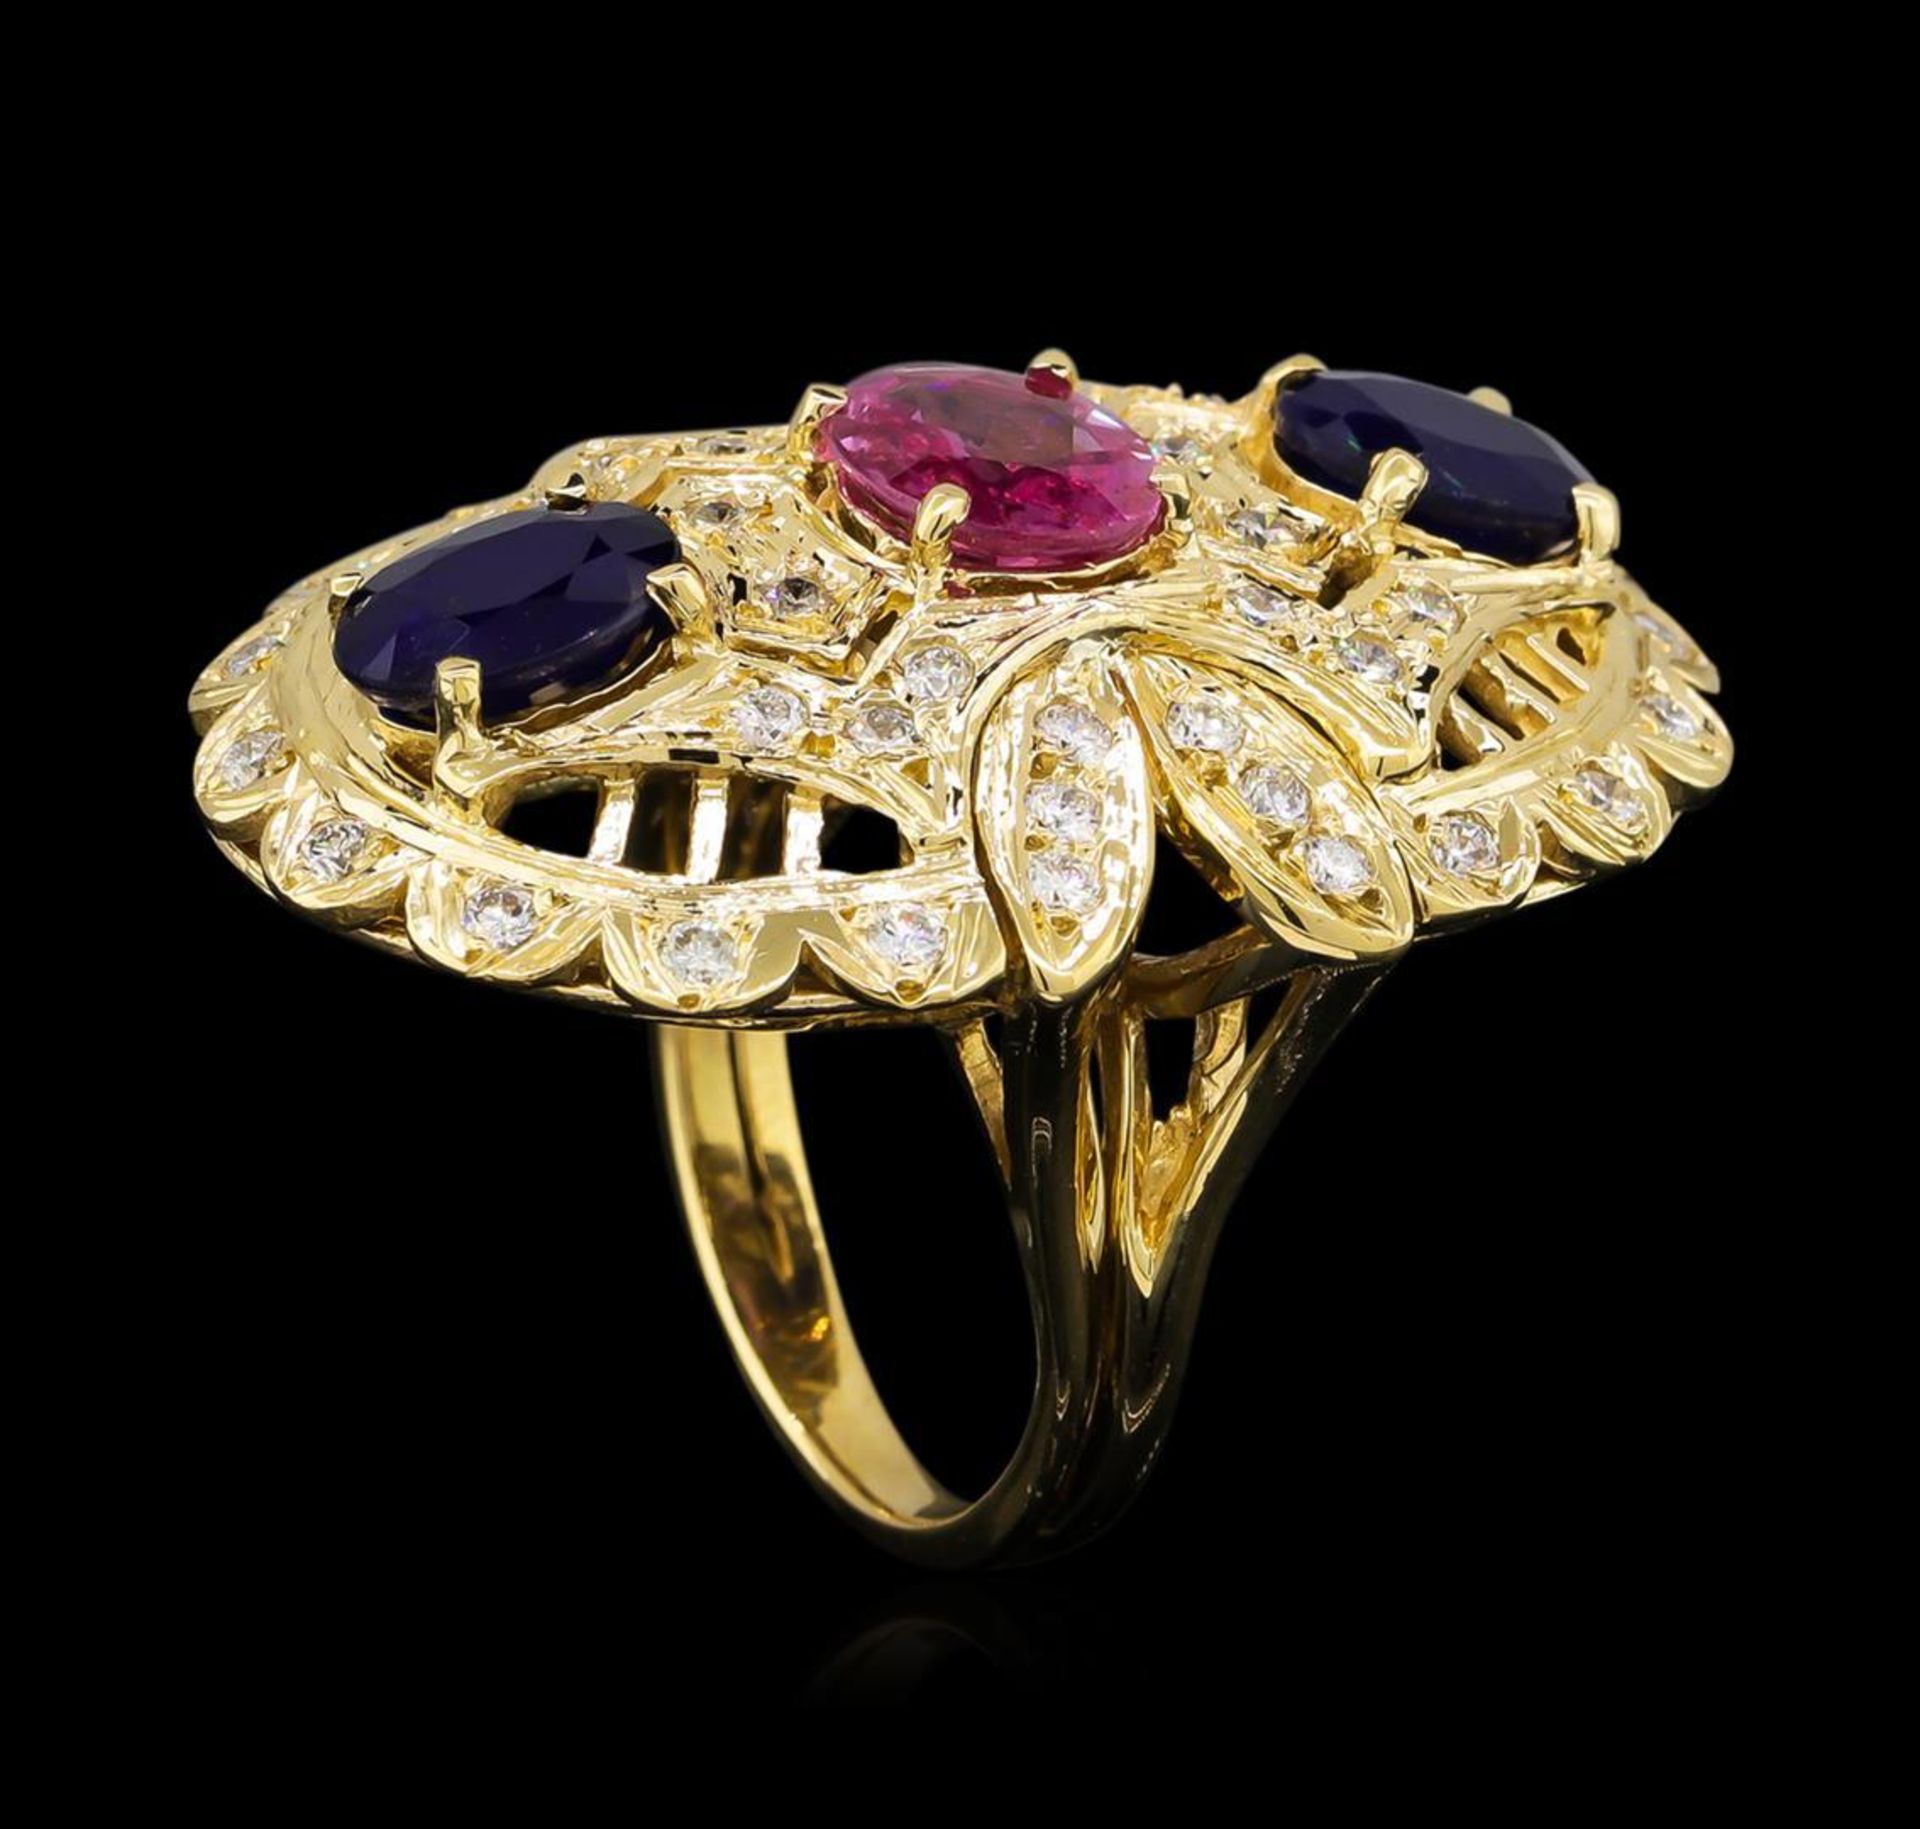 4.58 ctw Sapphire and Diamond Ring - 14KT Yellow Gold - Image 4 of 5